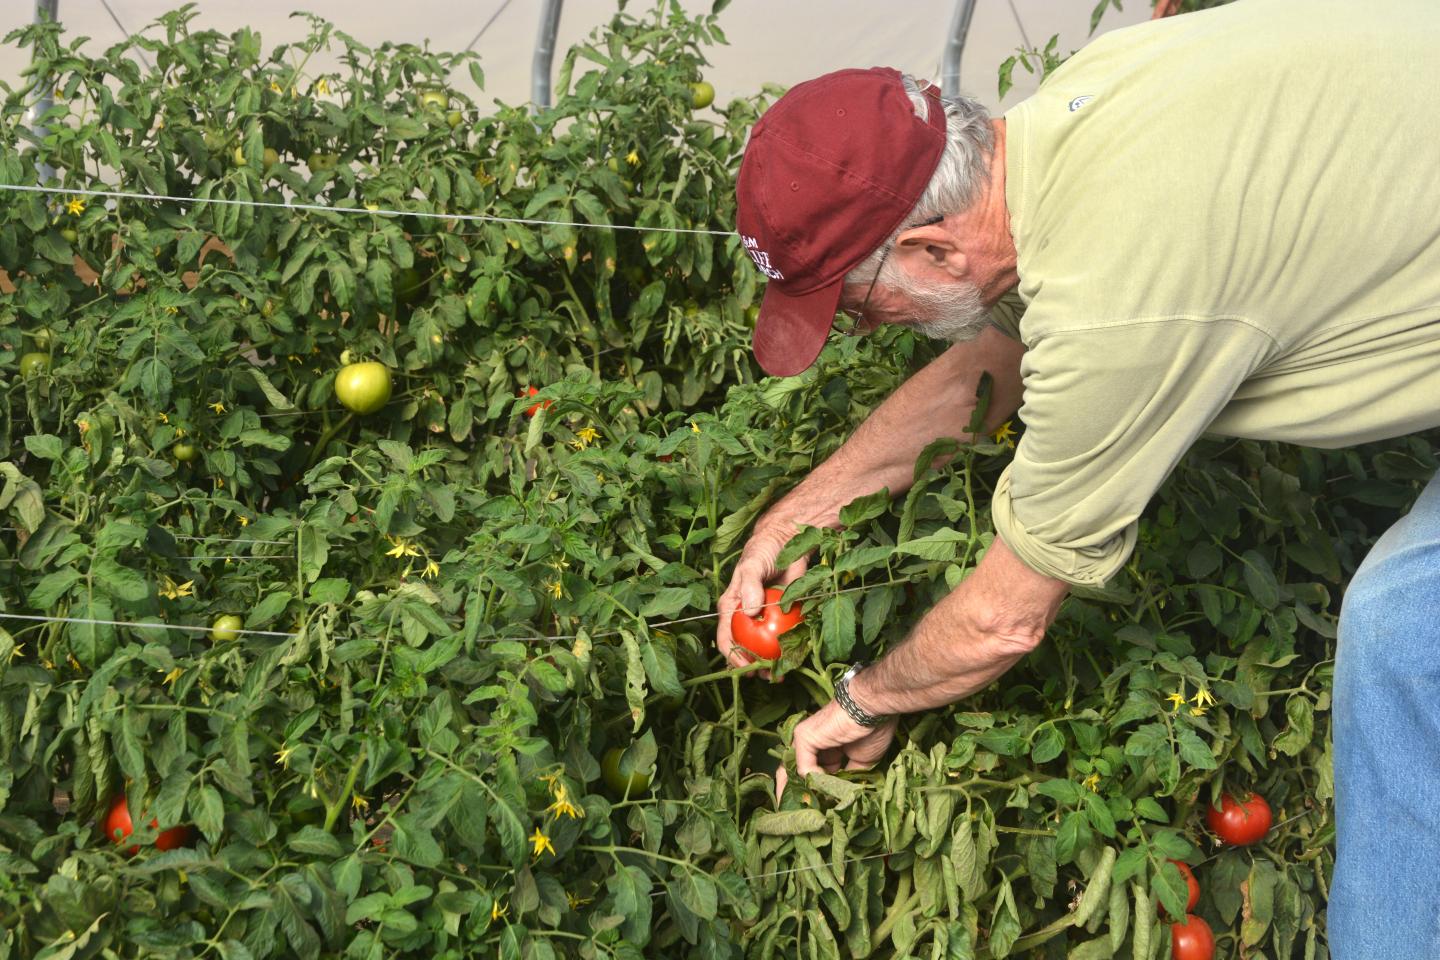 Dr. Charlie Rush with High-Tunnel Tomatoes